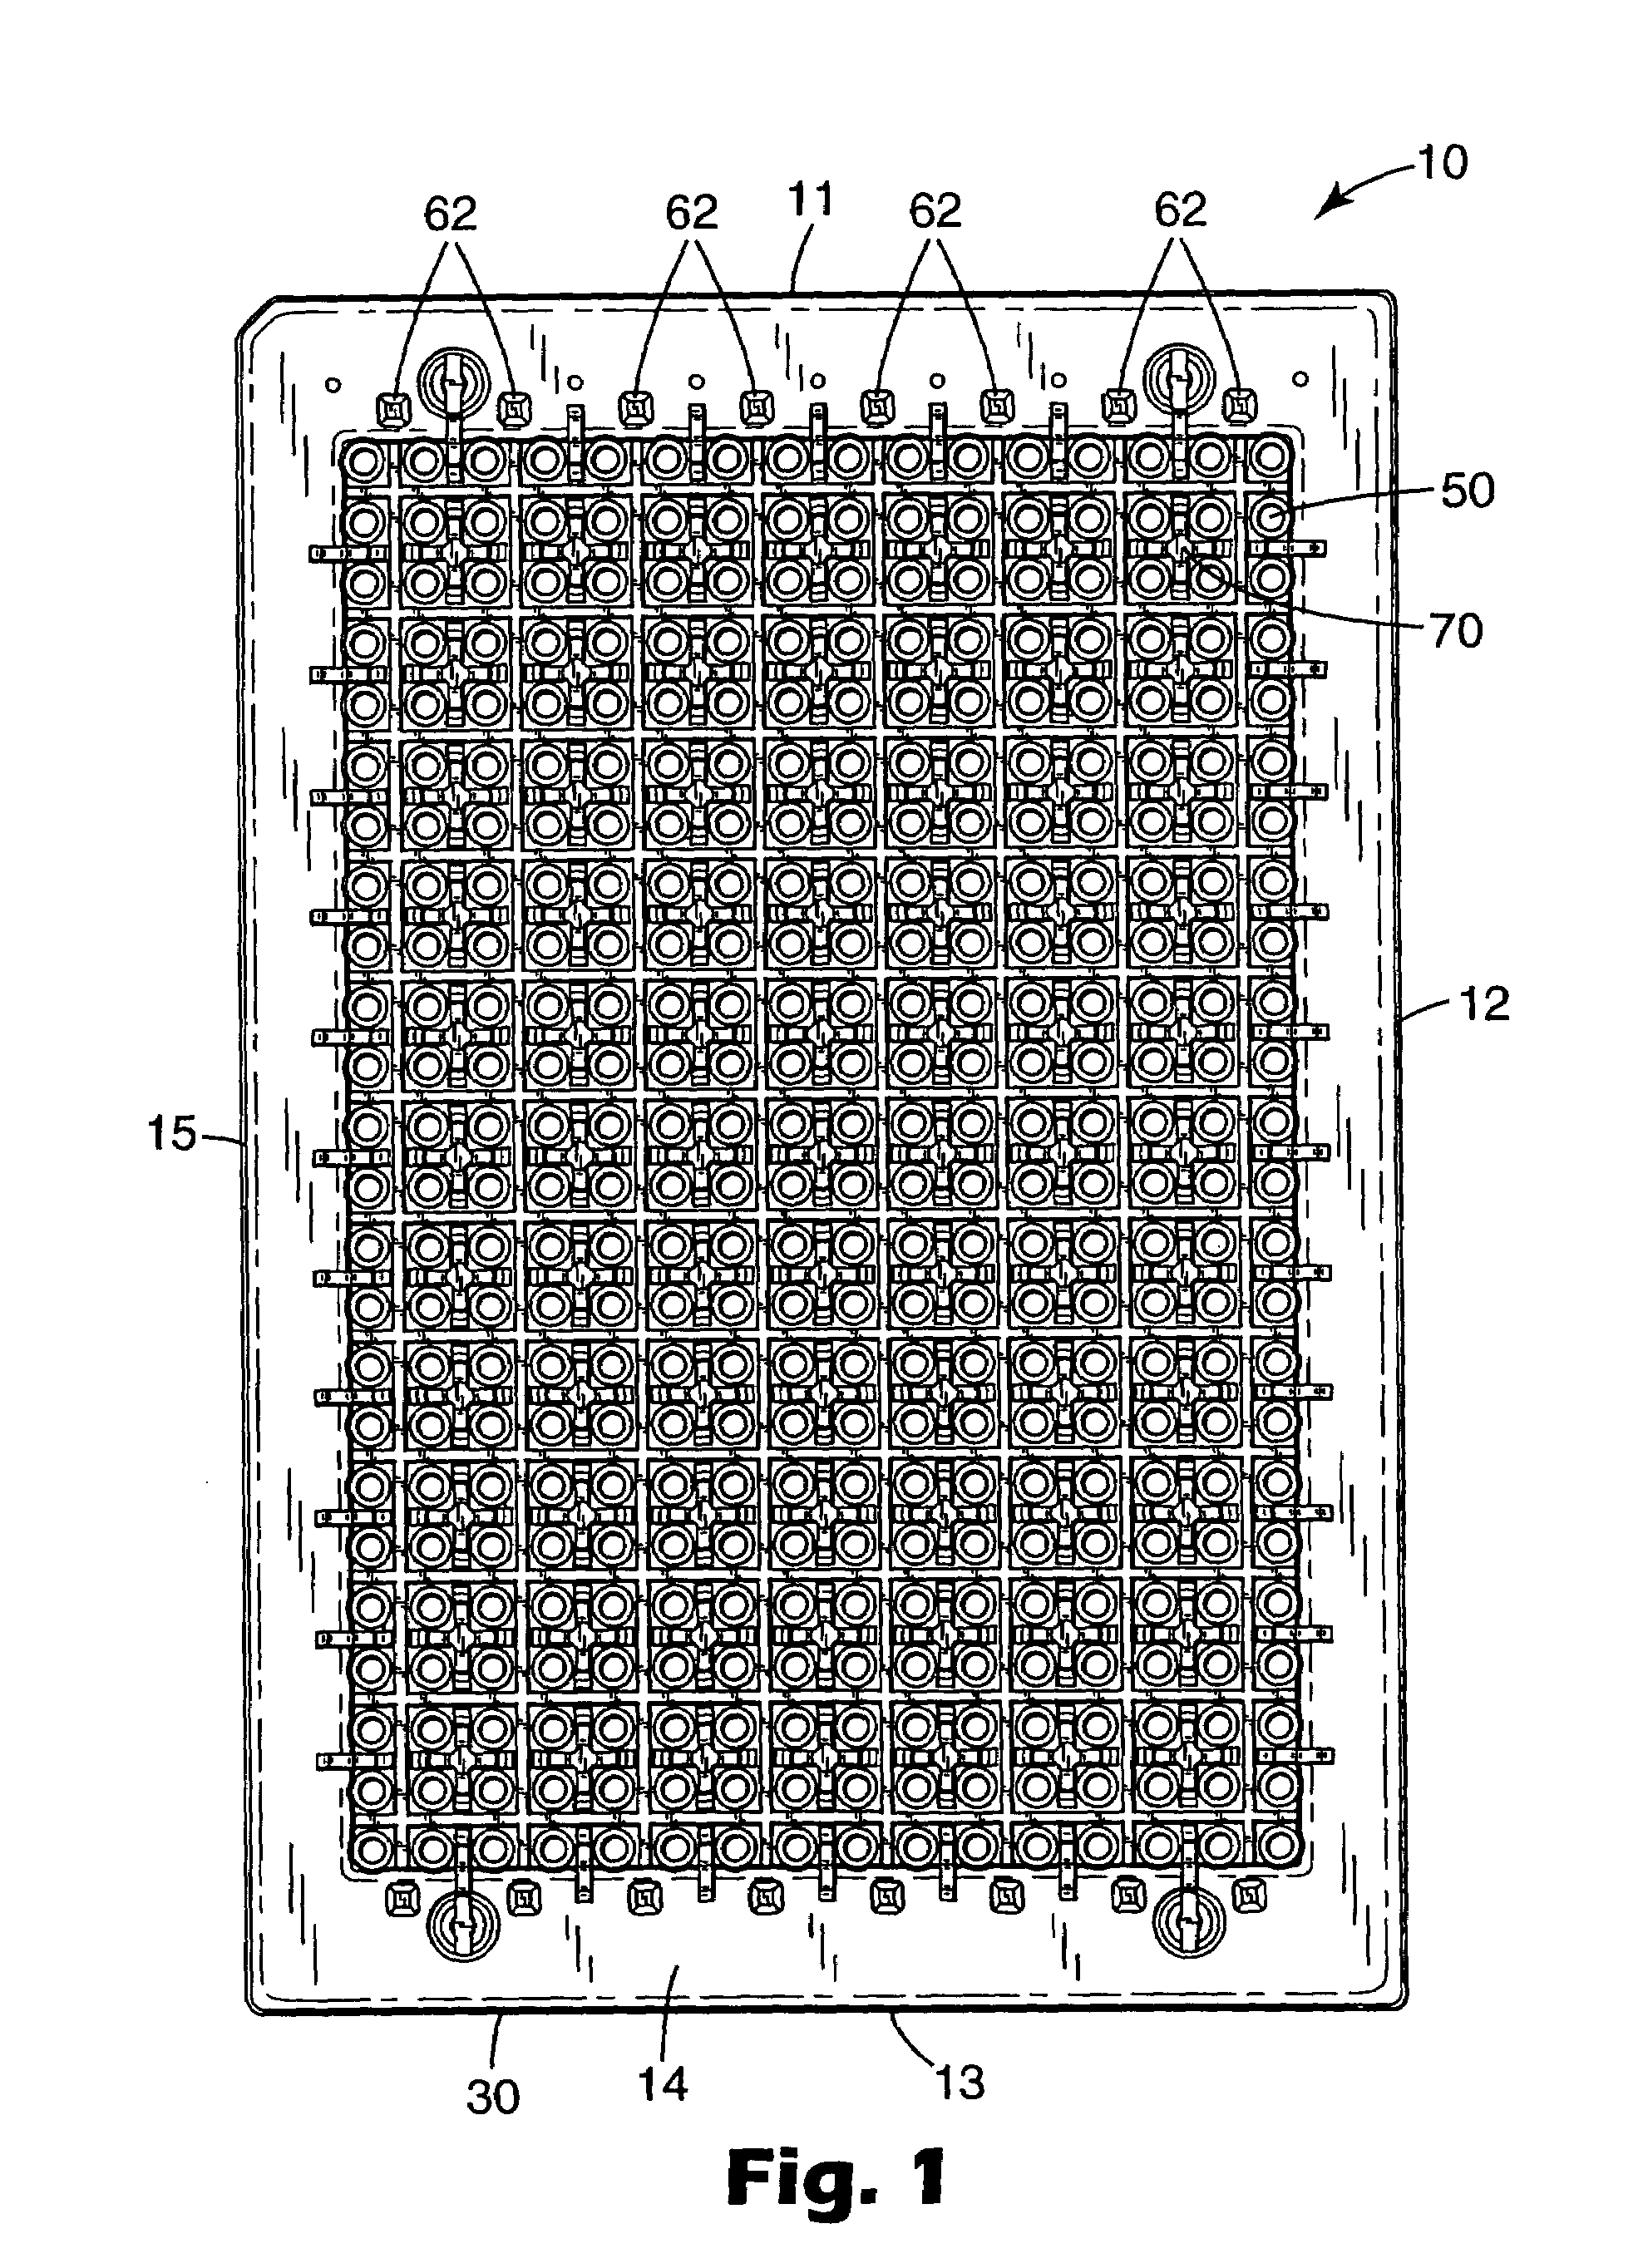 Integrated sample processing devices